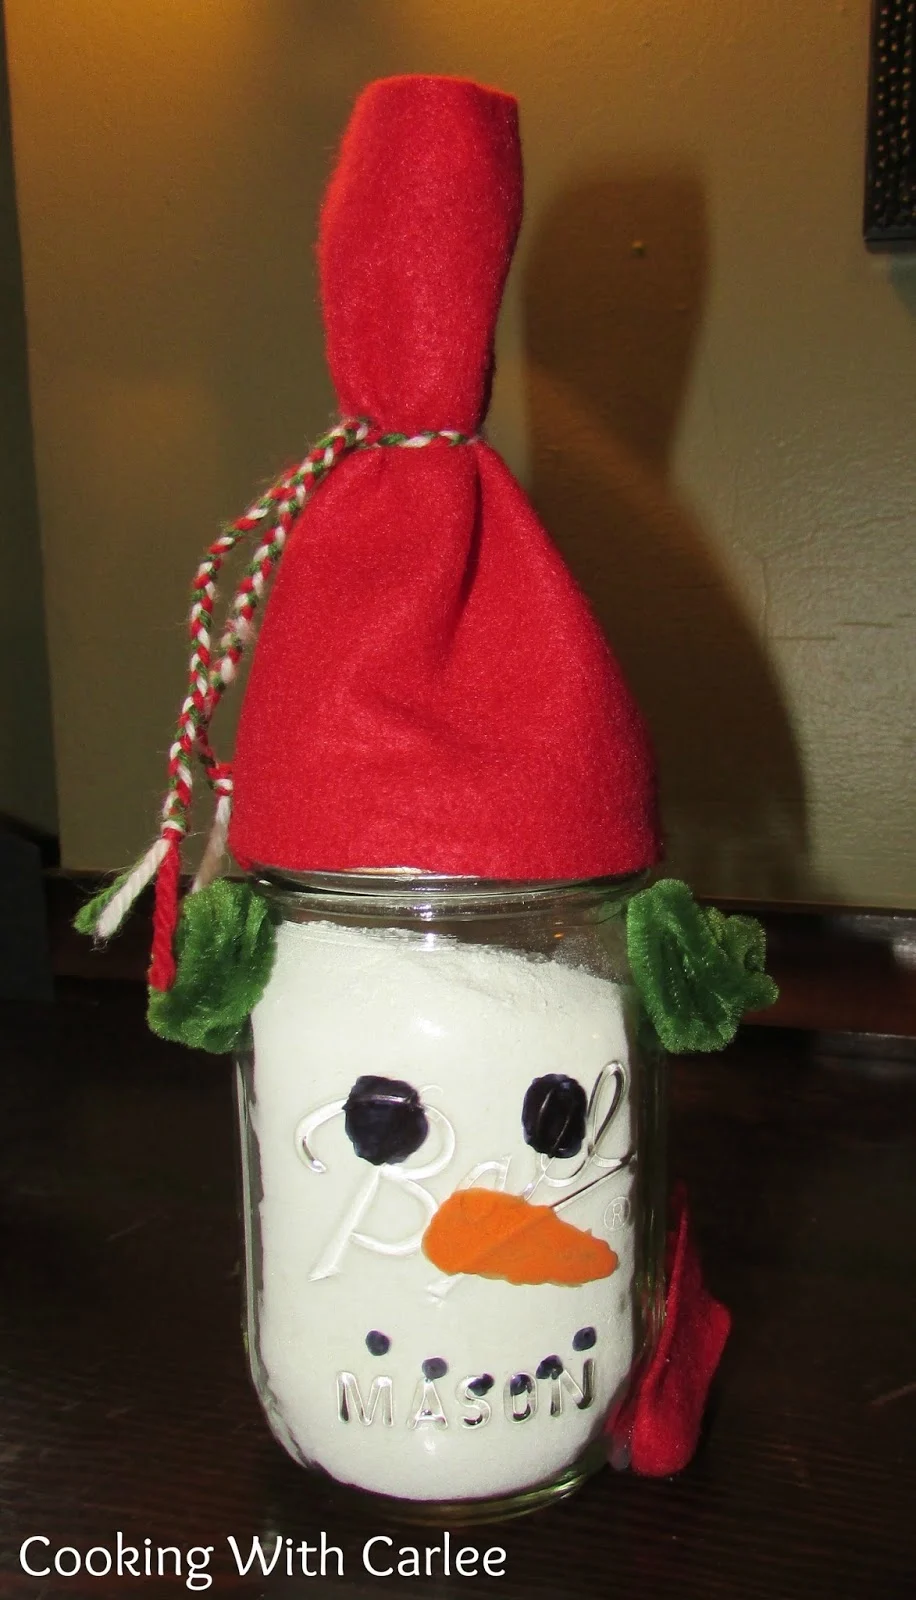 Ball jar filled with white hot chocolate mix, with snowman face painted on it and felt hat and scarf. 